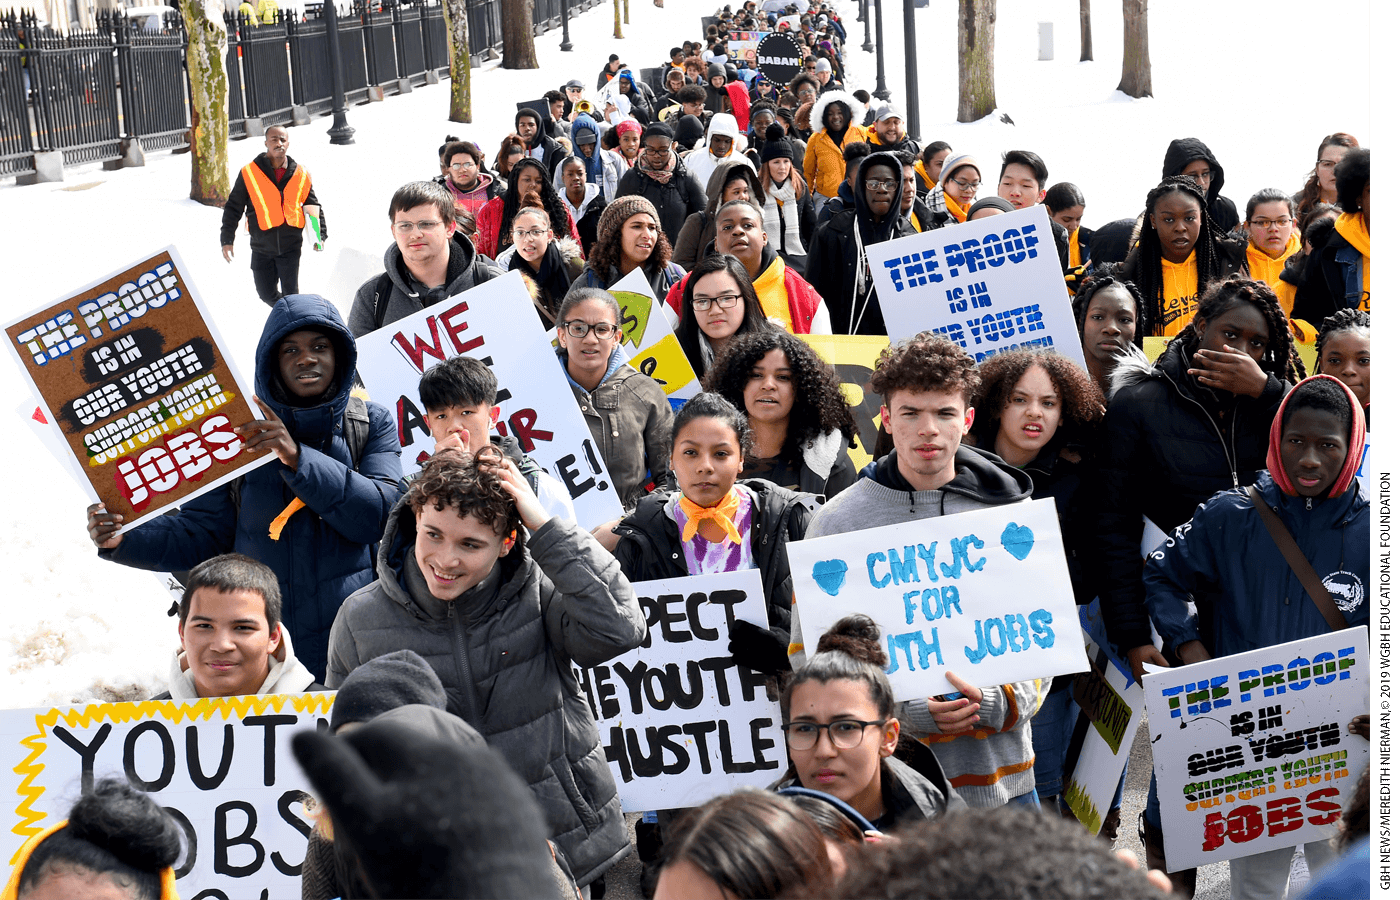 During a 2019 rally in Boston Common, several hundred young people from across Massachusetts called for a host of jobs-related reforms, including expanded funding for schools and youth jobs and expunging criminal records for anyone under the age of 21.